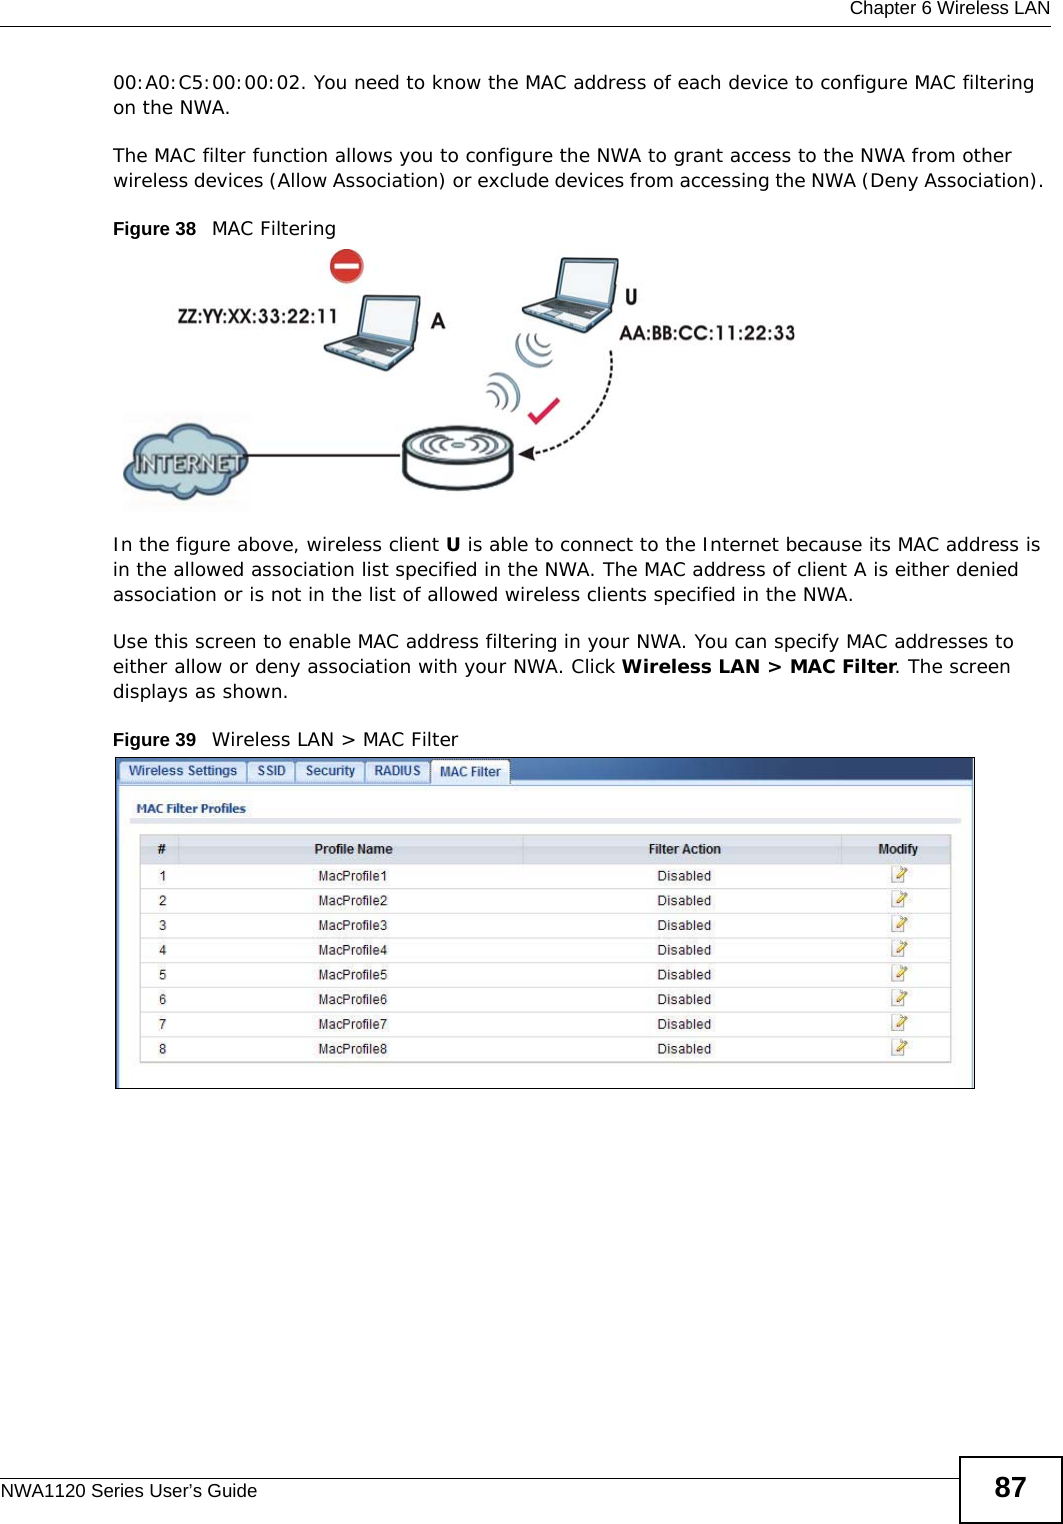  Chapter 6 Wireless LANNWA1120 Series User’s Guide 8700:A0:C5:00:00:02. You need to know the MAC address of each device to configure MAC filtering on the NWA.The MAC filter function allows you to configure the NWA to grant access to the NWA from other wireless devices (Allow Association) or exclude devices from accessing the NWA (Deny Association). Figure 38   MAC Filtering In the figure above, wireless client U is able to connect to the Internet because its MAC address is in the allowed association list specified in the NWA. The MAC address of client A is either denied association or is not in the list of allowed wireless clients specified in the NWA.Use this screen to enable MAC address filtering in your NWA. You can specify MAC addresses to either allow or deny association with your NWA. Click Wireless LAN &gt; MAC Filter. The screen displays as shown. Figure 39   Wireless LAN &gt; MAC Filter